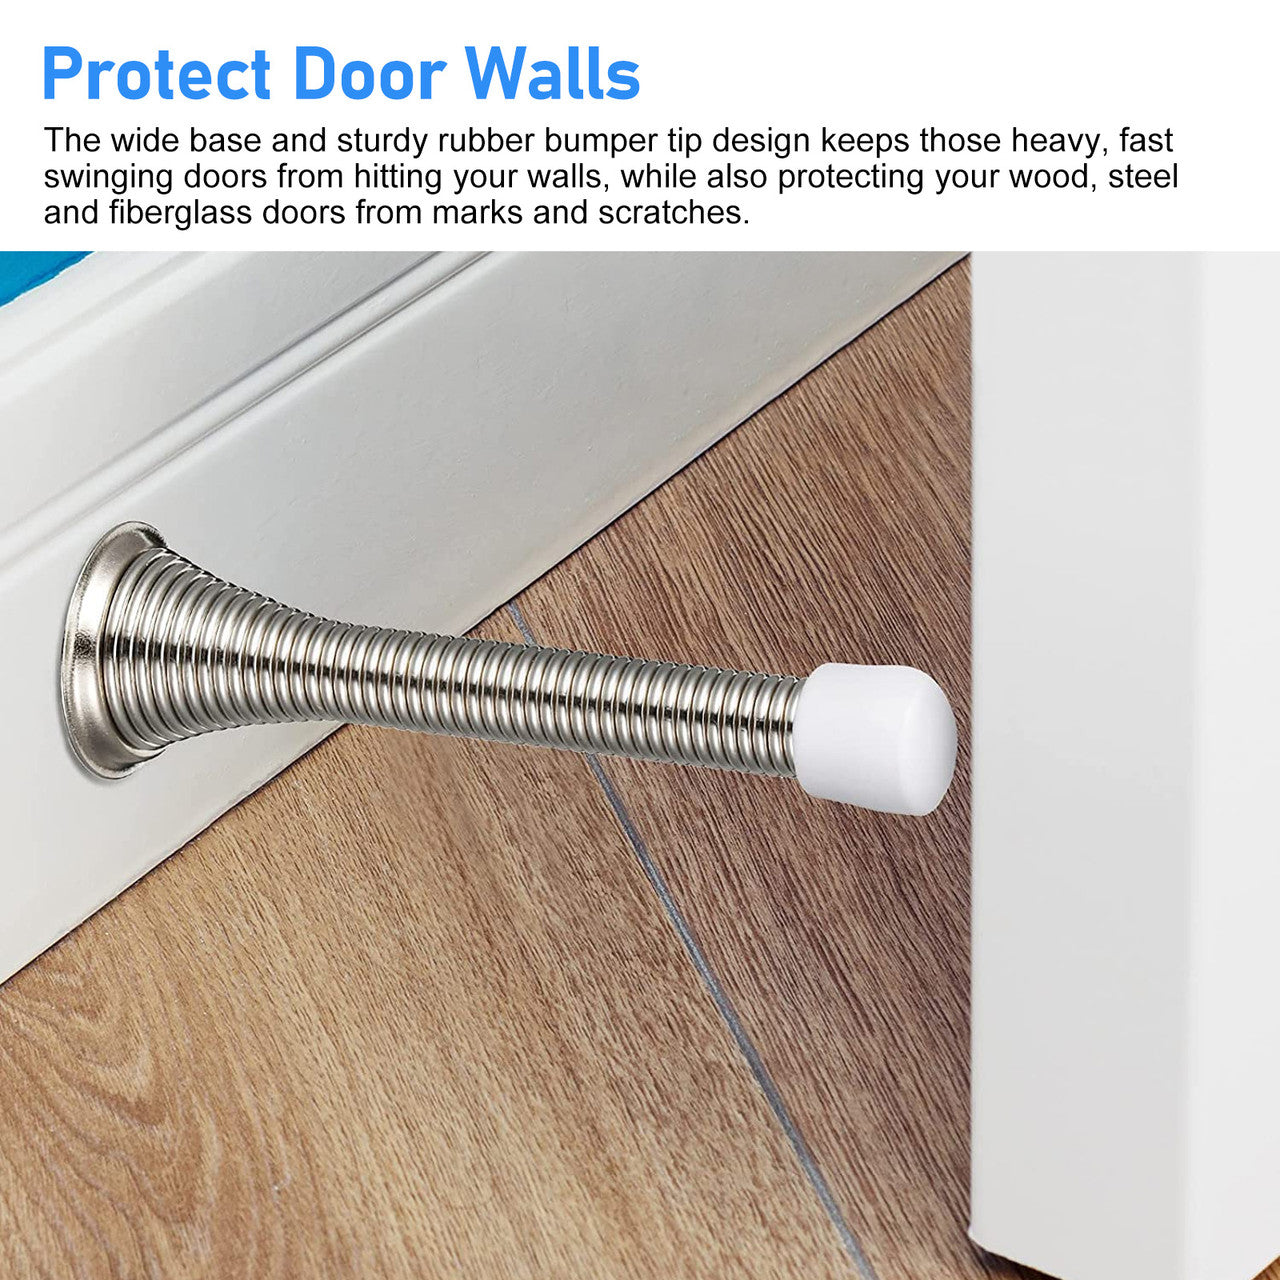 10 Packs Spring Door Stop - Protecting Your Wood, Steel and Fiberglass Doors from Marks and Scratches, Spring Door Stopper with White Rubber Bumper Tips (Silver, White Bumpers)